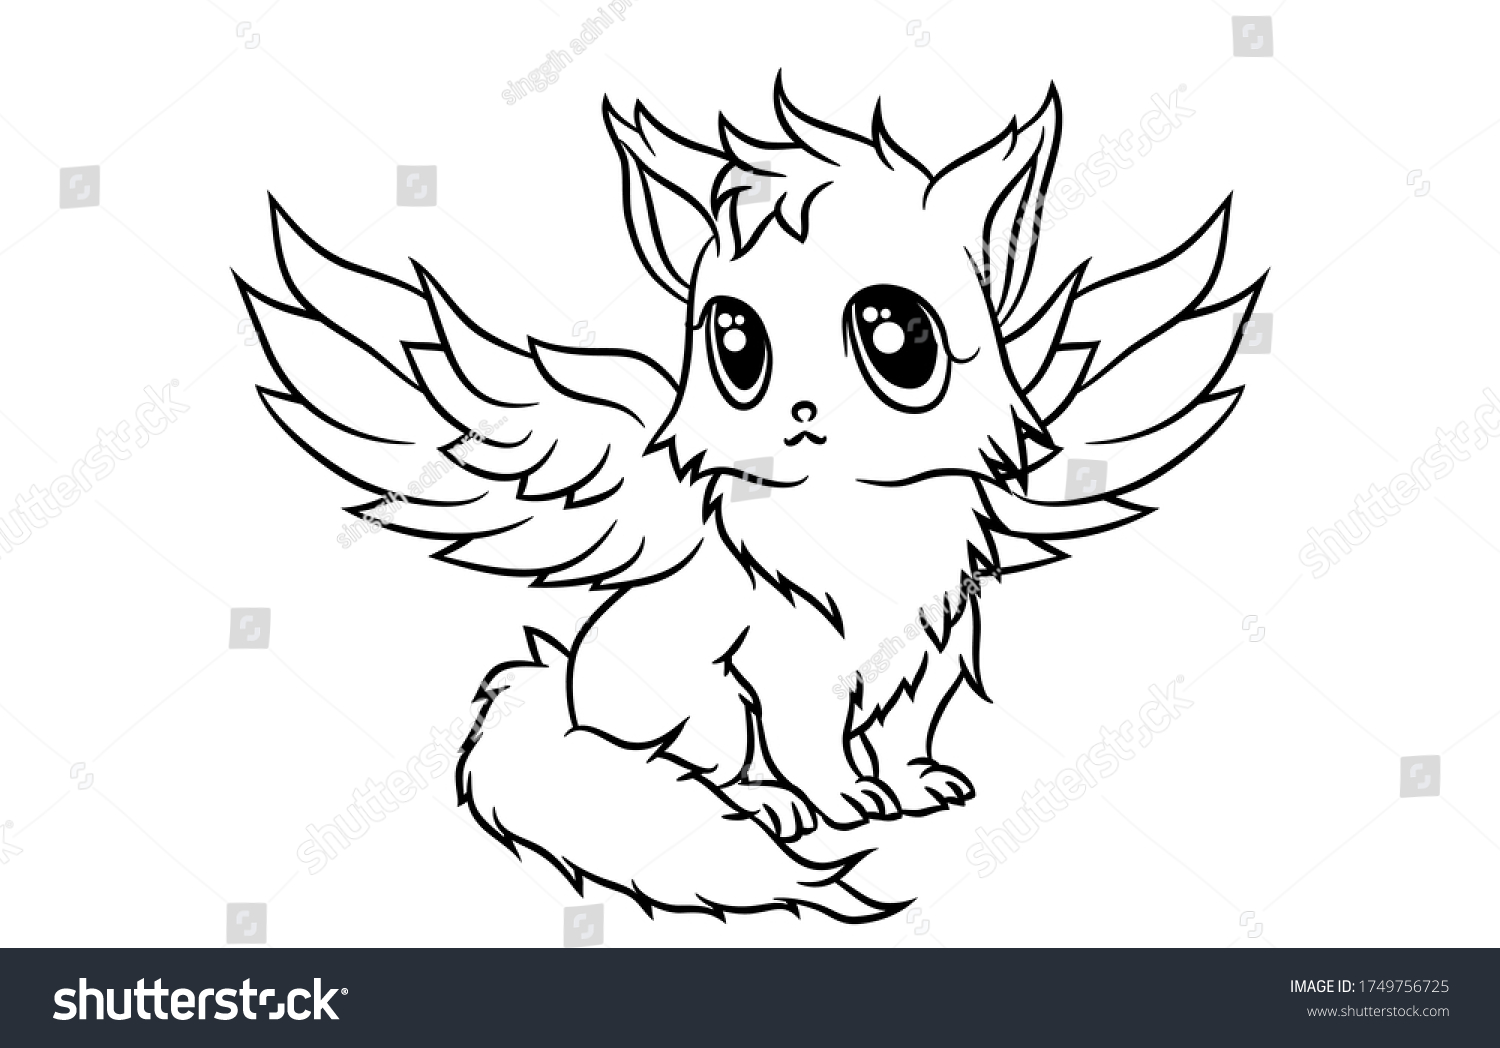 Cute Winged Fox Sitting Relaxed Looking Stock Vector (Royalty Free ...